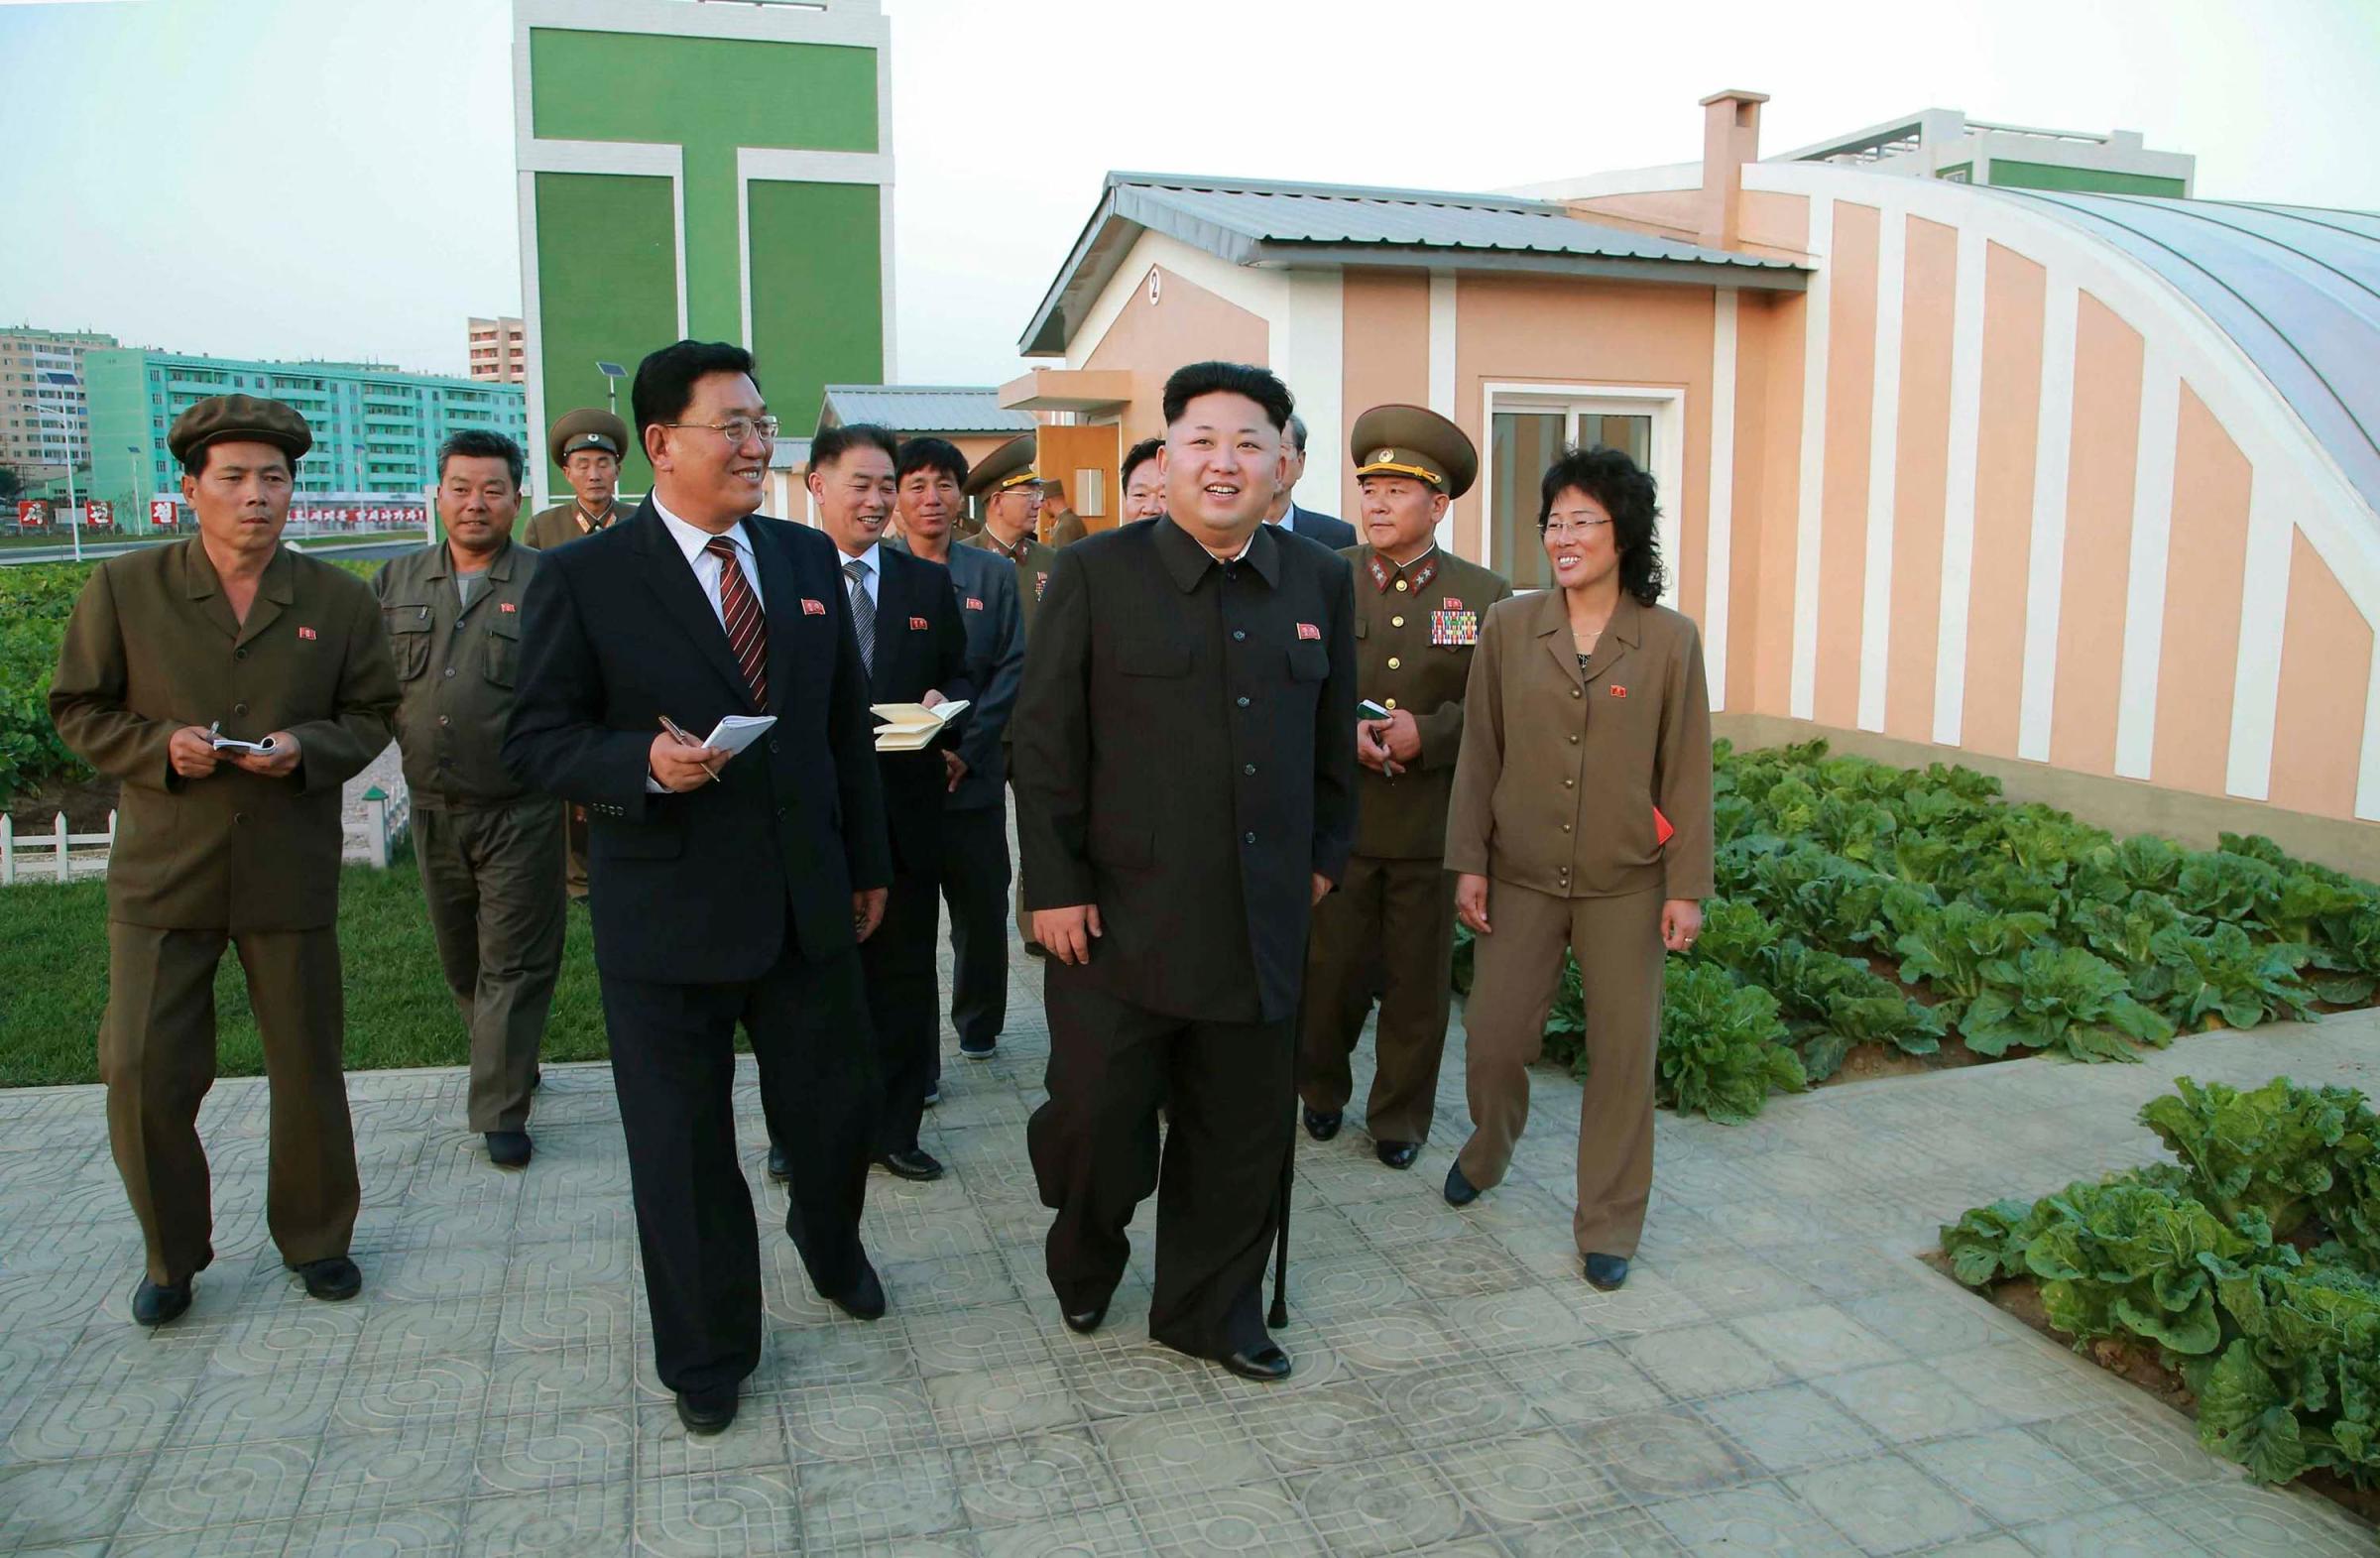 North Korean leader Kim Jong Un gives field guidance at the newly built Wisong Scientists Residential District in Pyongyang.